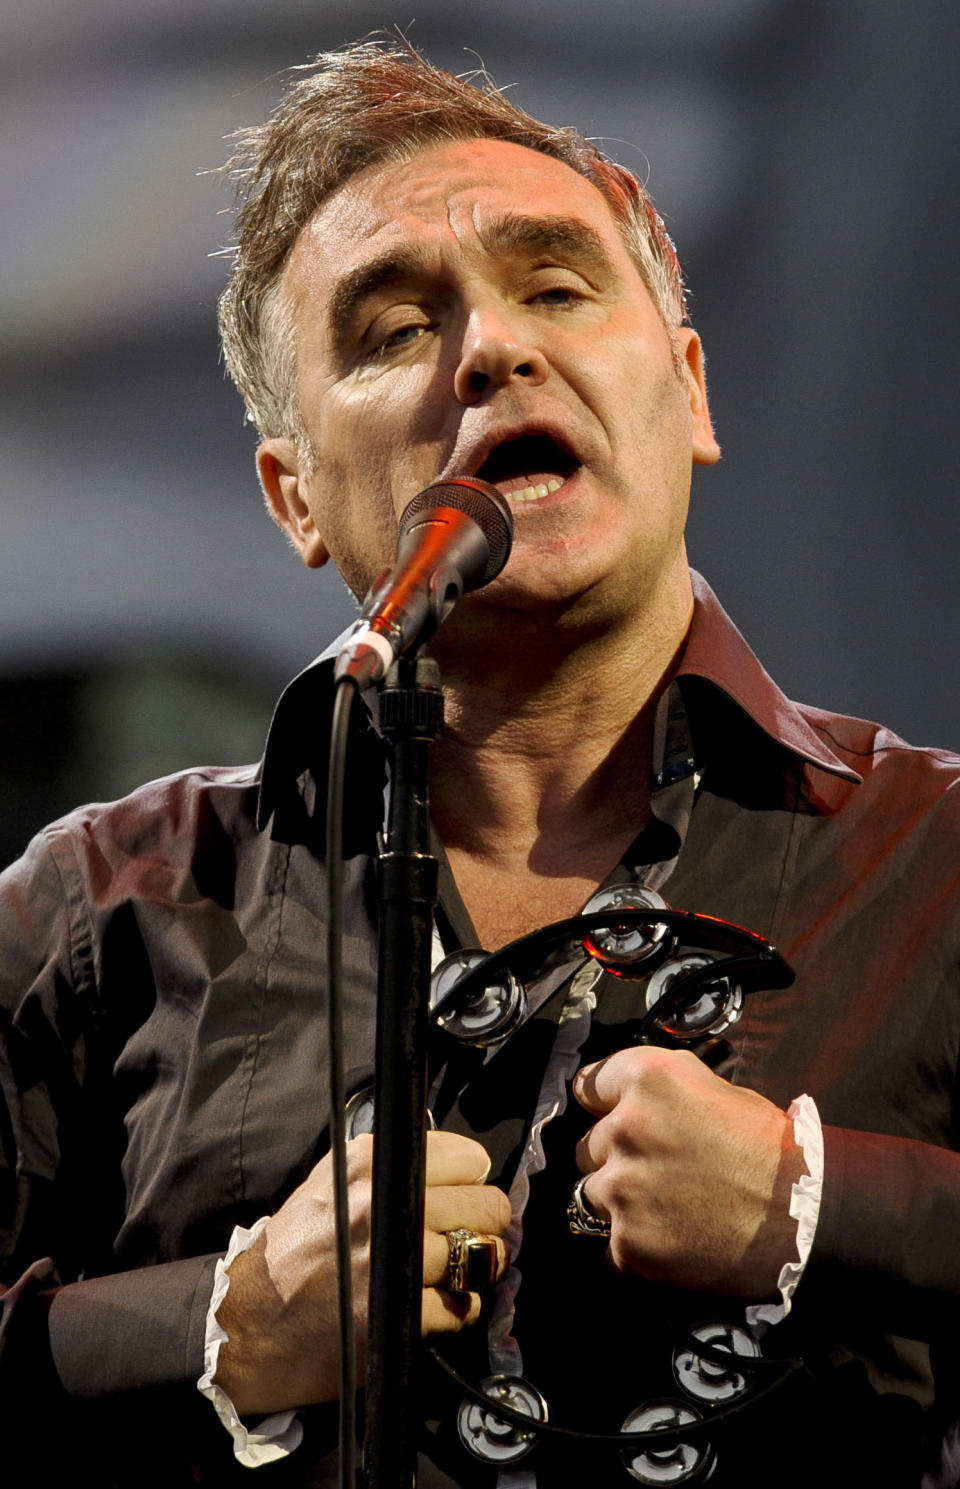 Morrissey shared some controversial views on modern issues. (PA)